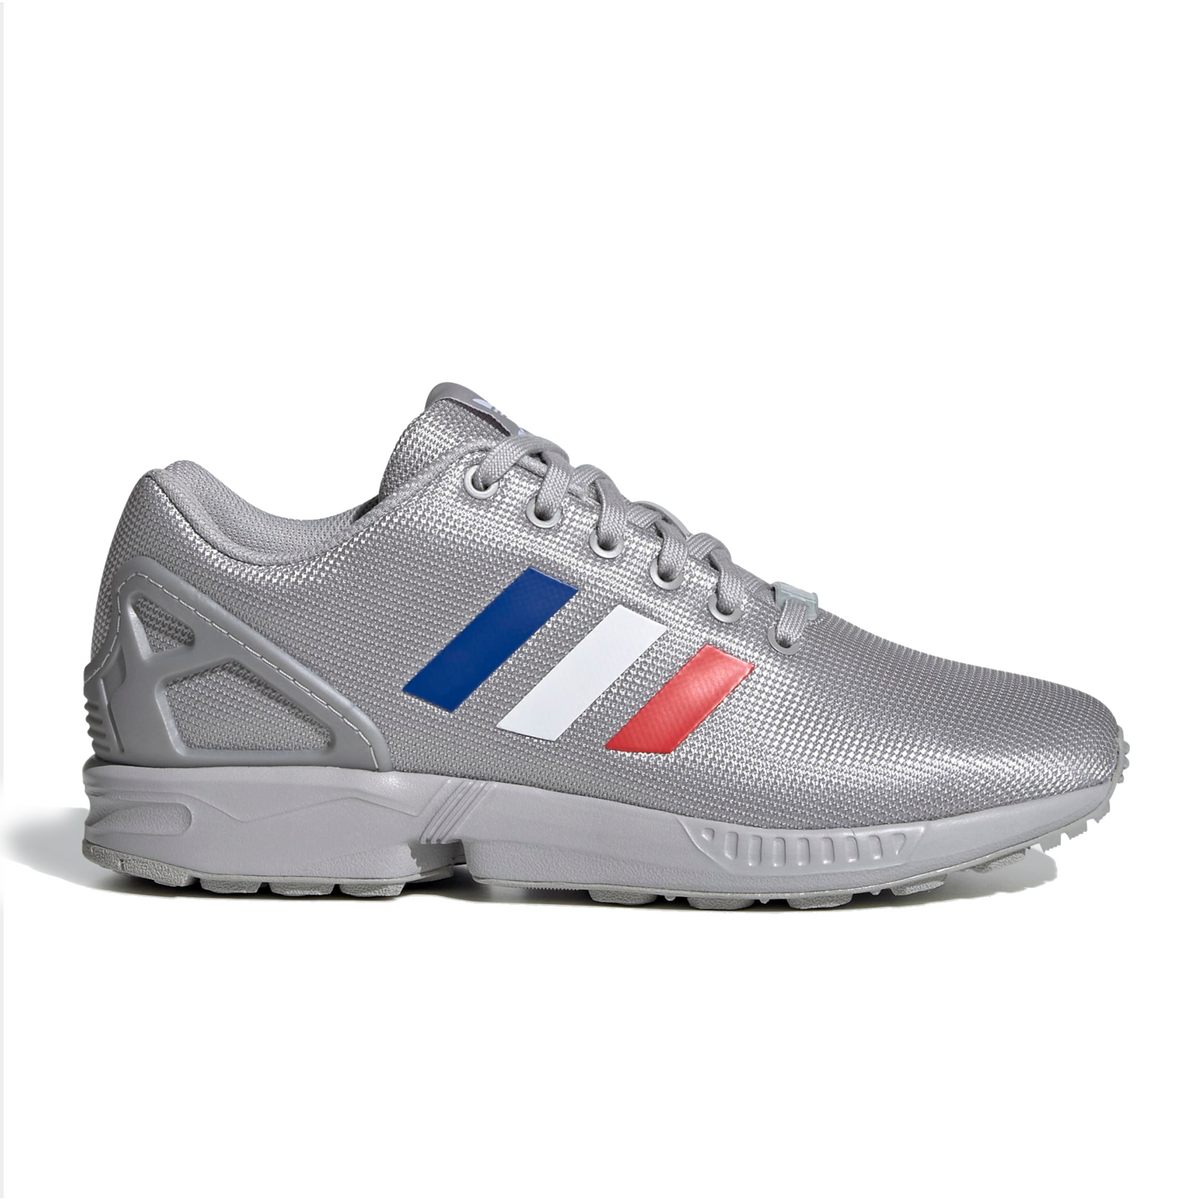 Adidas Men's ZX Flux Shoes Grey / Royal Blue / Red — Just Sports